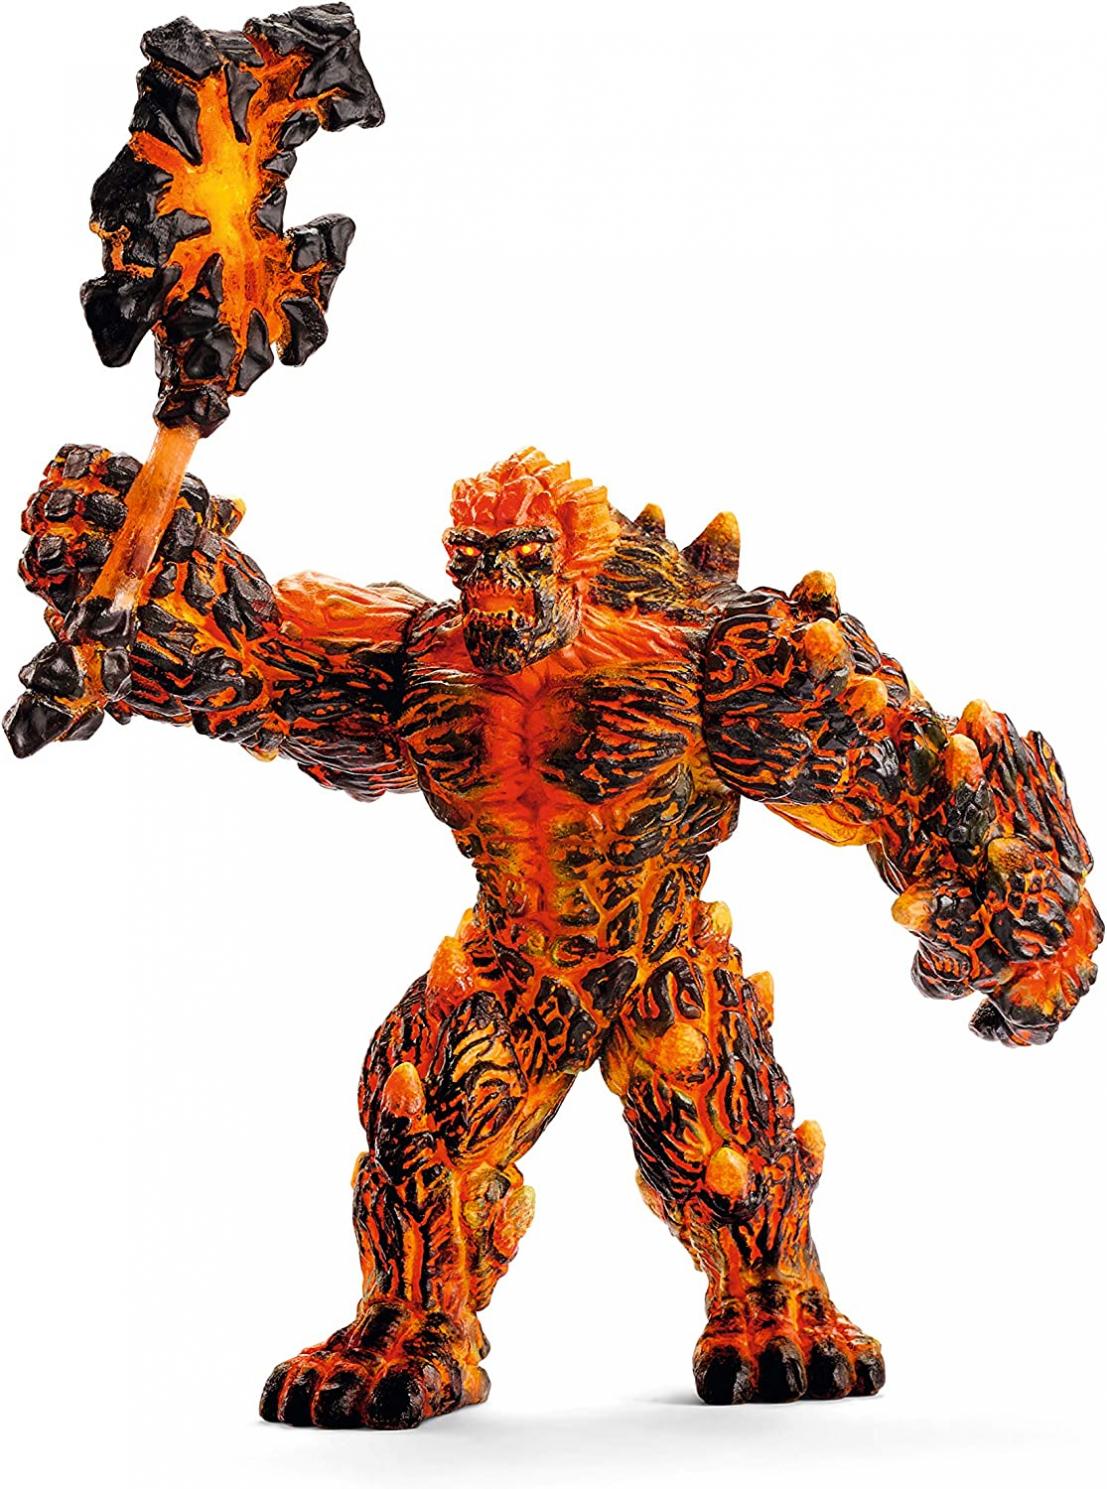 Schleich Eldrador, Eldrador Creatures, Action Figures for Boys and Girls 7-12 years old, Lava Golem with Weapon